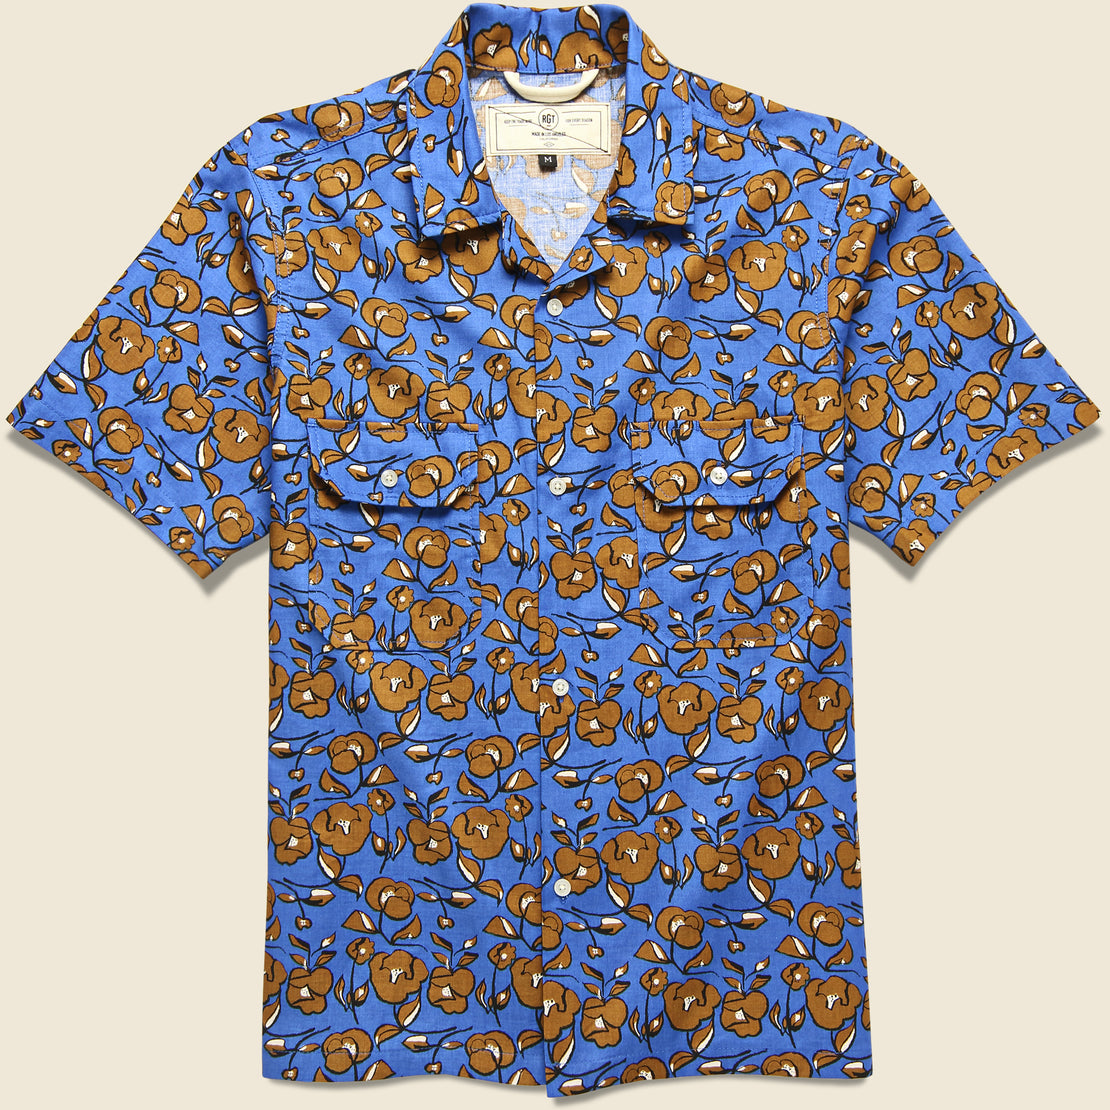 Rogue Territory Infantry Shirt - Blue Floral